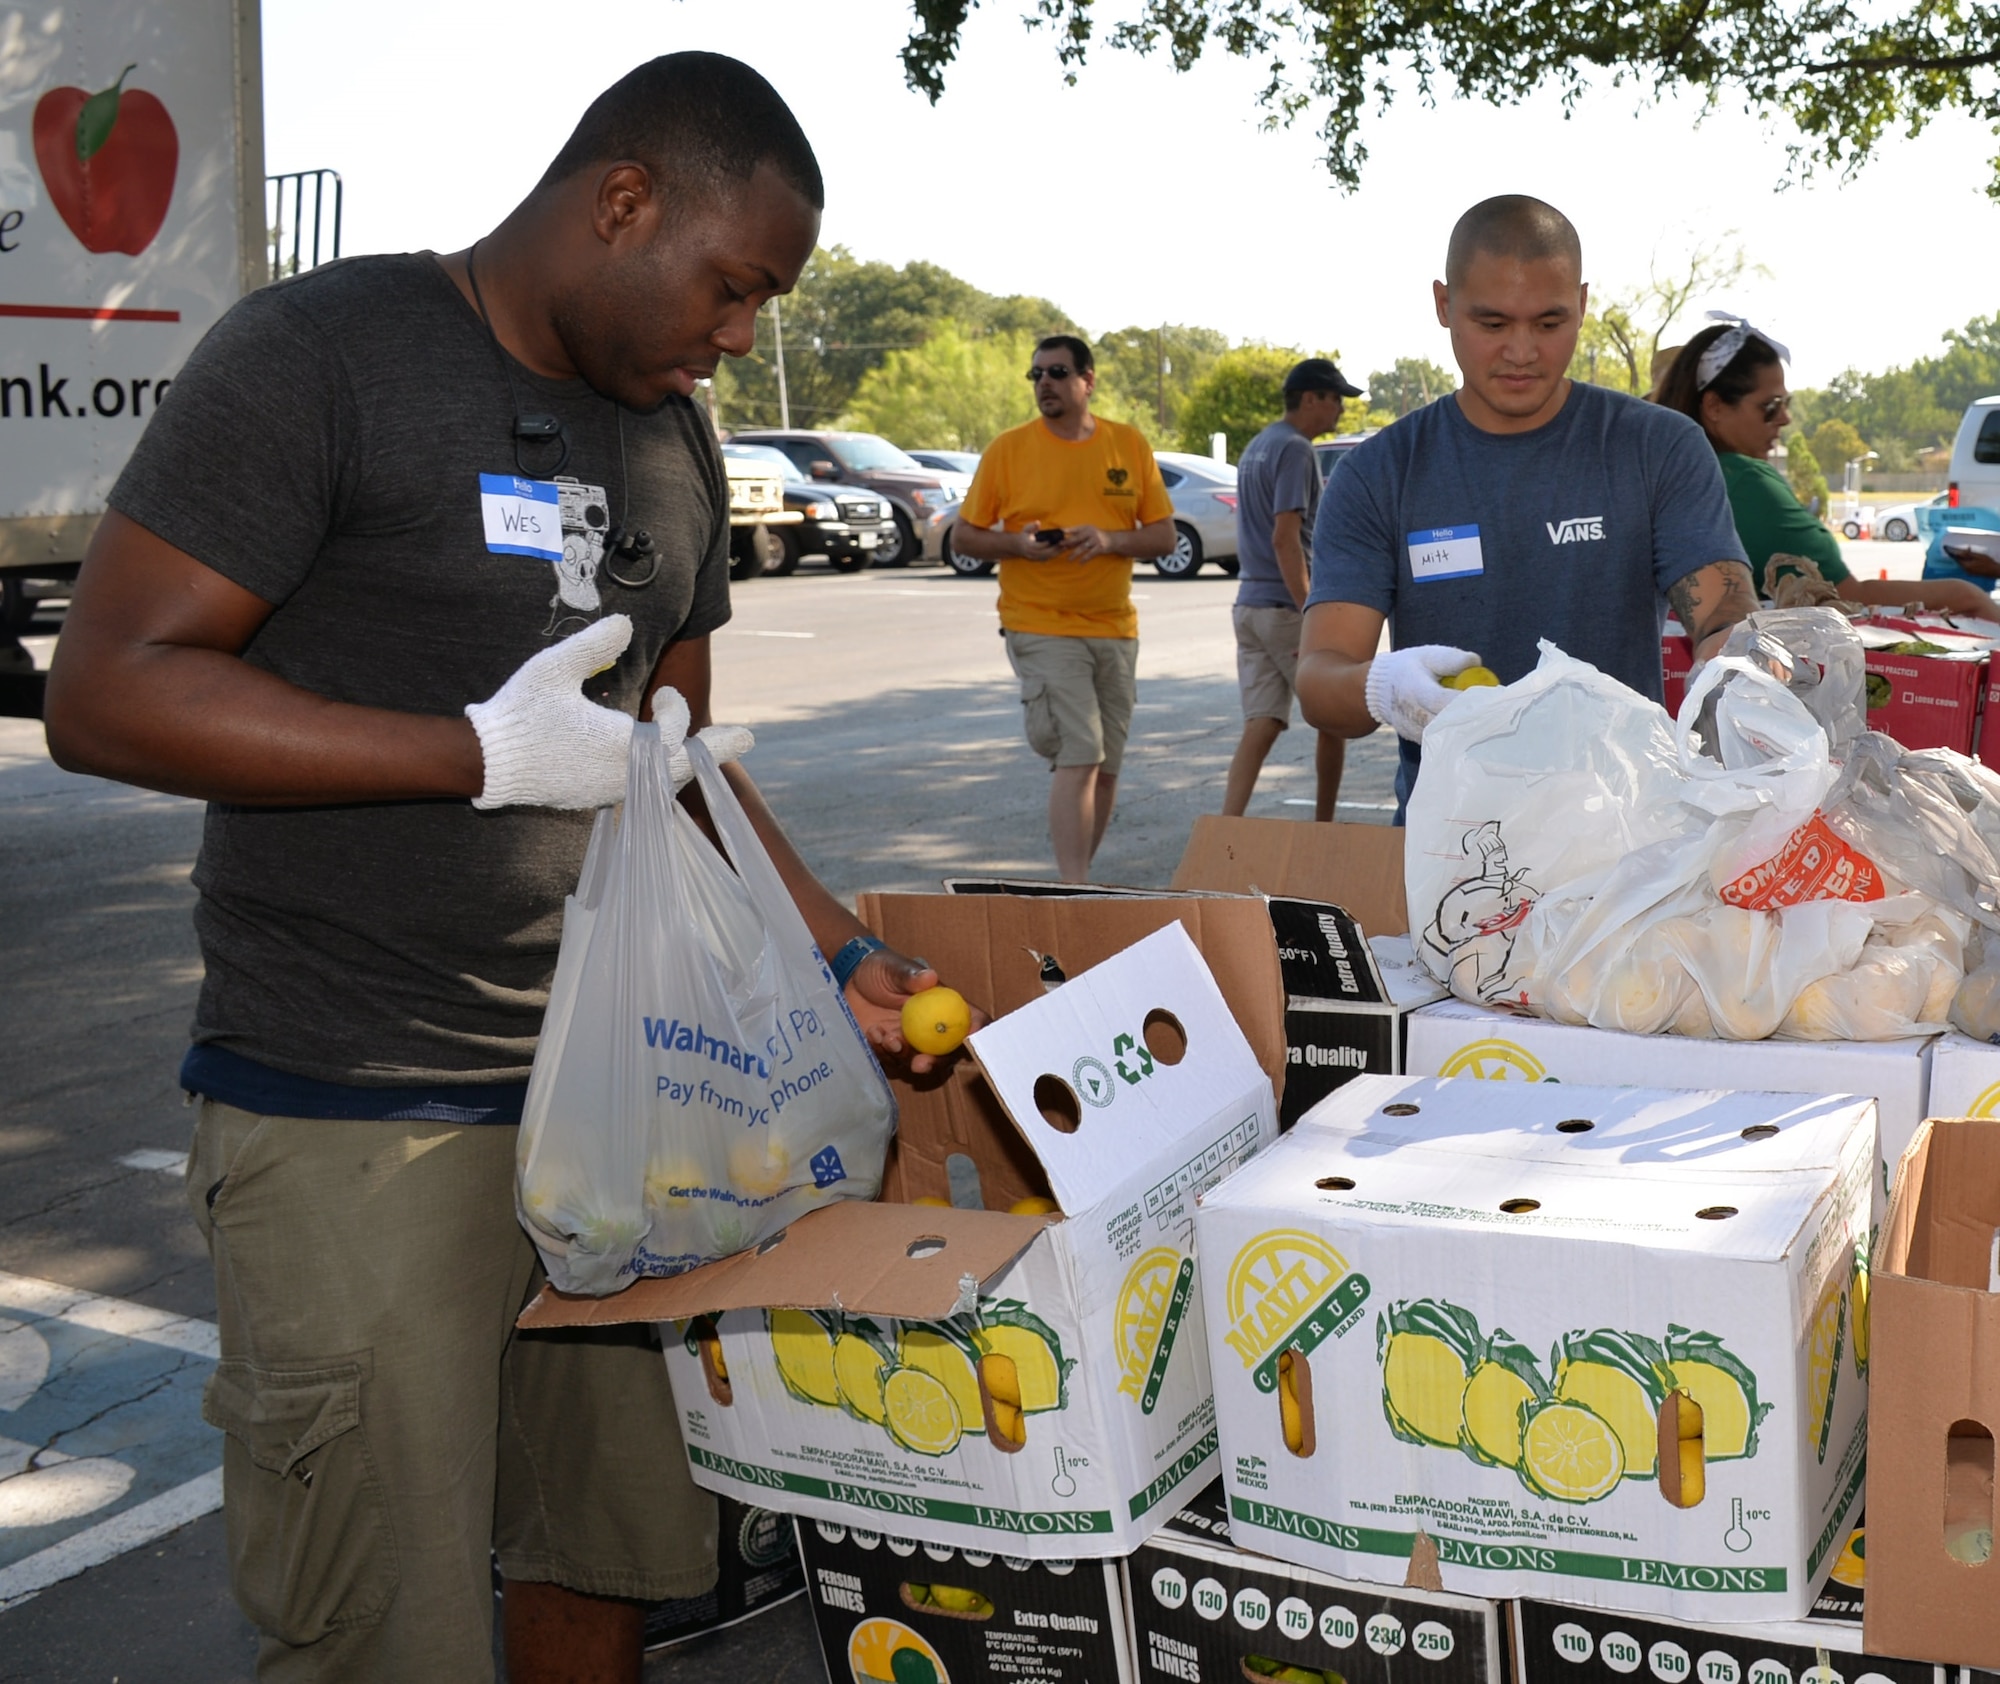 Staff Sgt. Salathiel Wesley, 433rd Maintenance Squadron aerospace ground equipment technician, and Tech. Sgt. Mitt Mekpongsatorn, 433rd Maintenance Group aerospace ground equipment technician, assemble packages of fresh fruit during a San Antonio Food Bank distribution event at Windcrest United Methodist Church Sept. 19. Fifteen Reserve Citizen Airmen from the 433rd Airlift Wing and 960th Cyberspace Wing participated in three distribution events over two days.